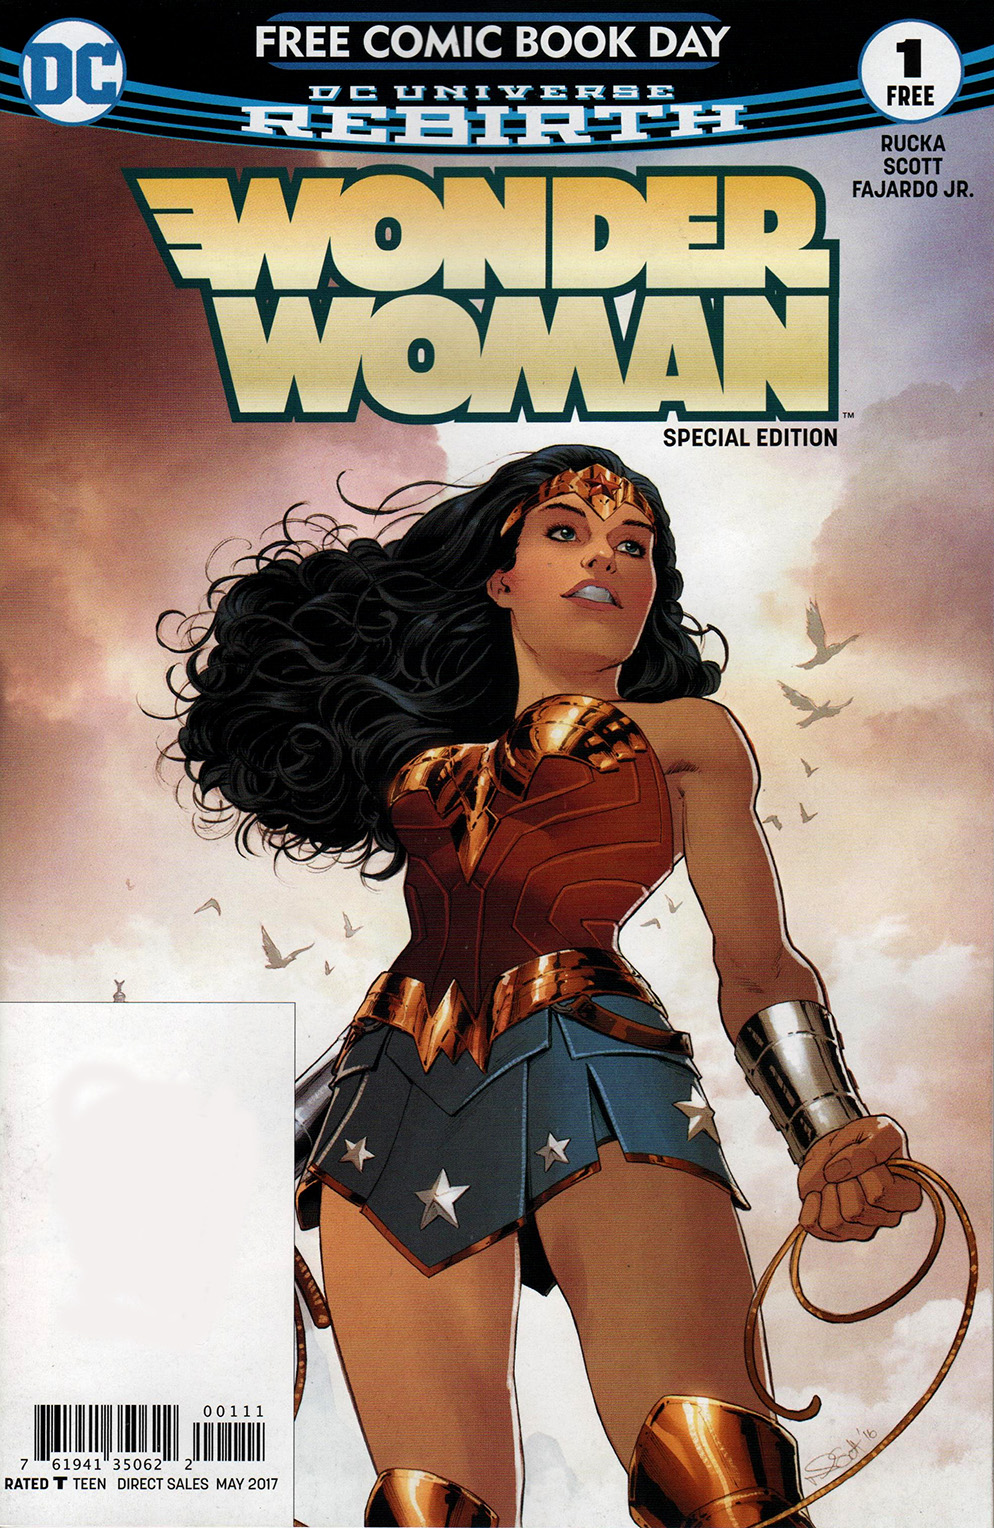 Read online Free Comic Book Day 2017 comic -  Issue # Wonder Woman 1 - 1